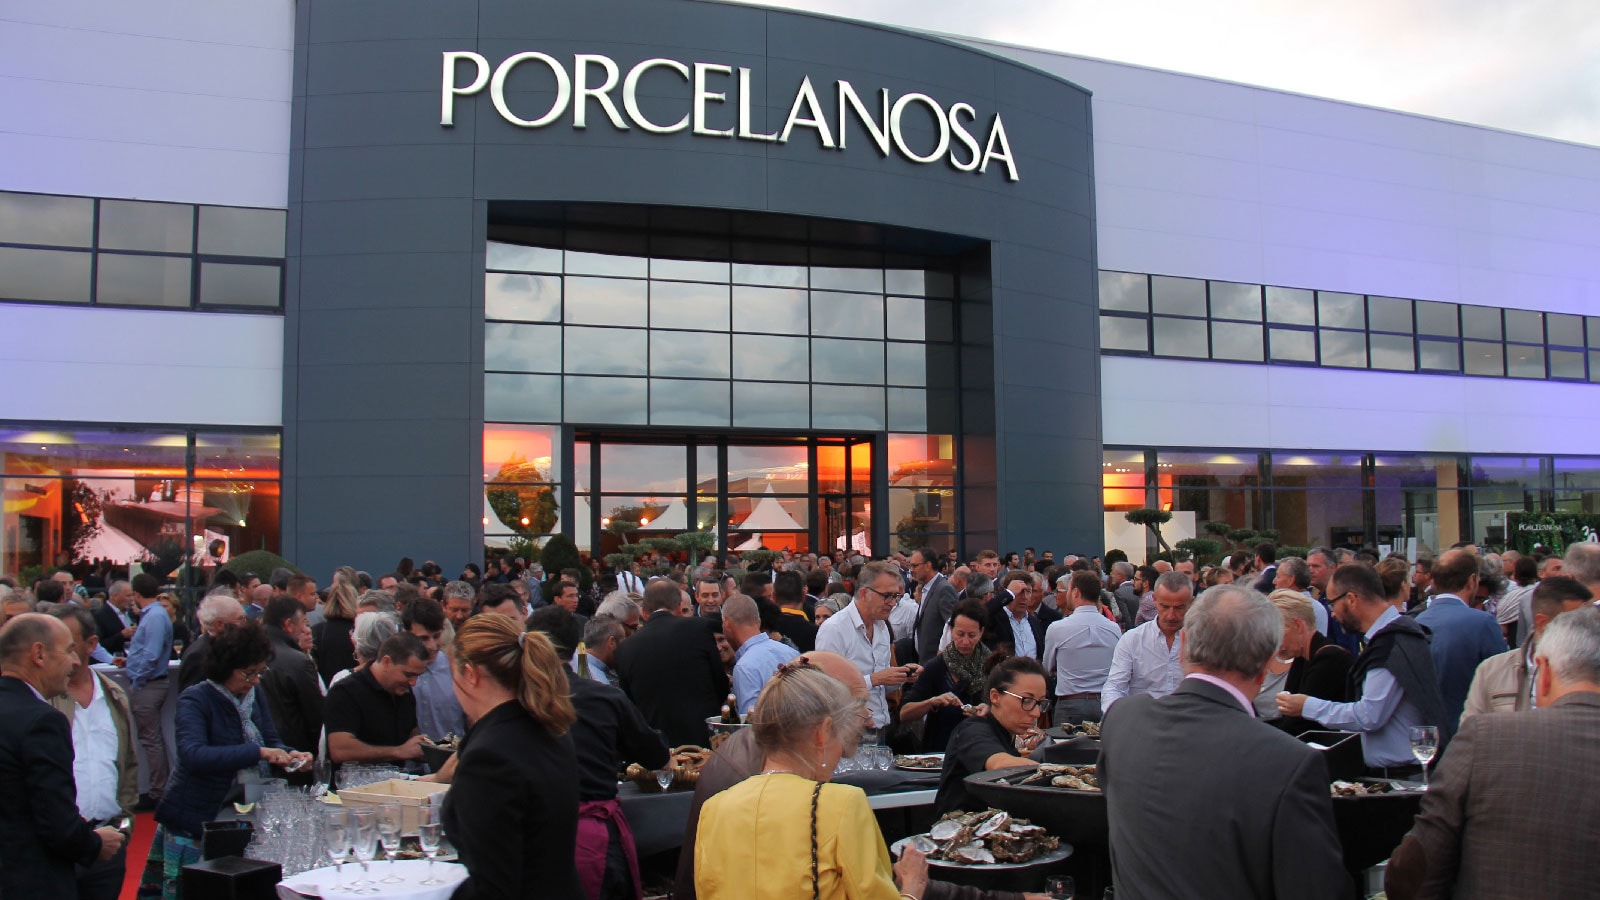 The PORCELANOSA Group celebrates its 30th anniversary in Strasbourg and in Nantes, France